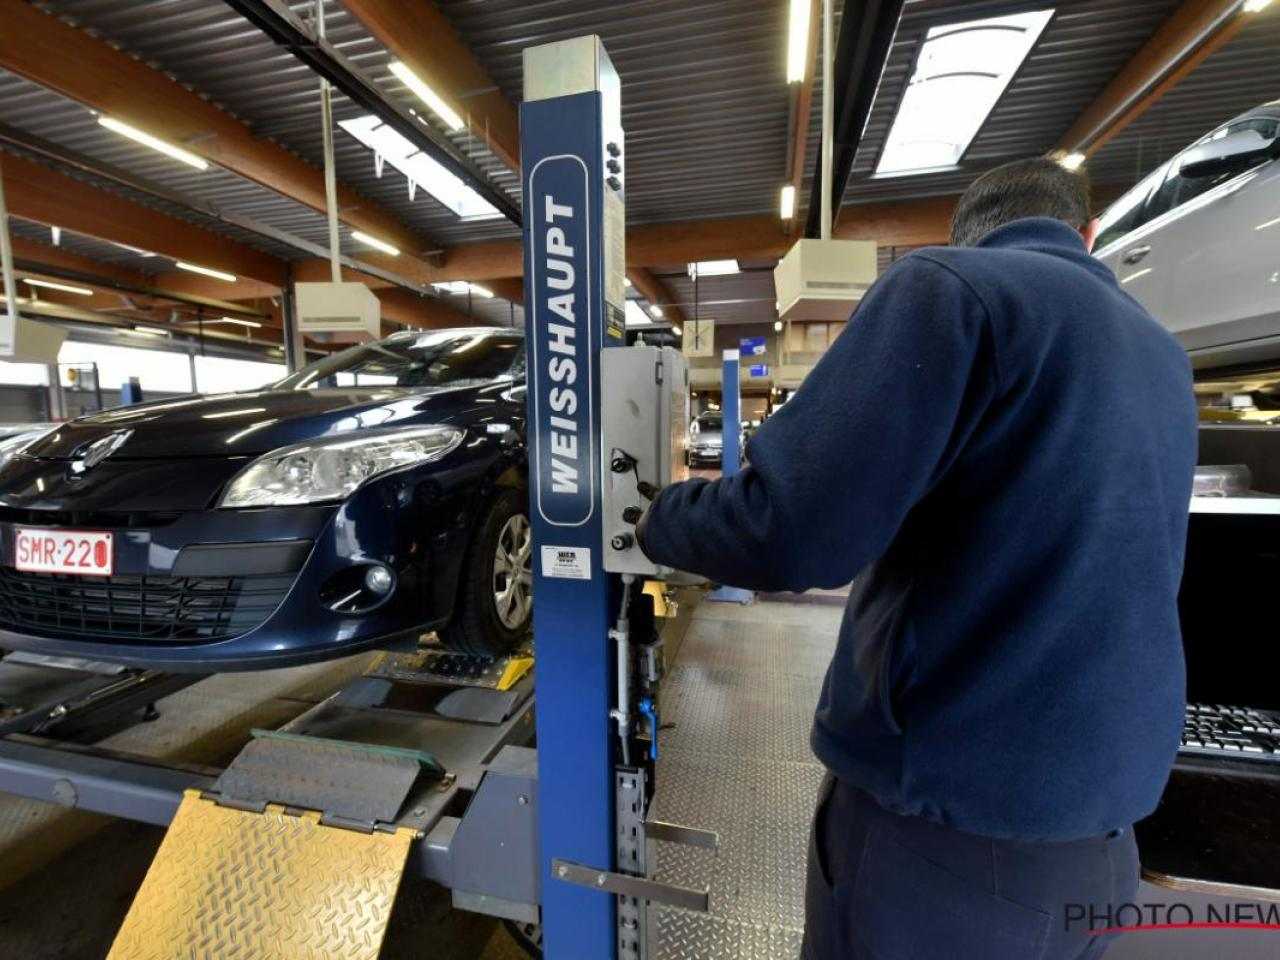 An important change is coming in car inspection: “It removes a lot of inconvenience from citizens.”